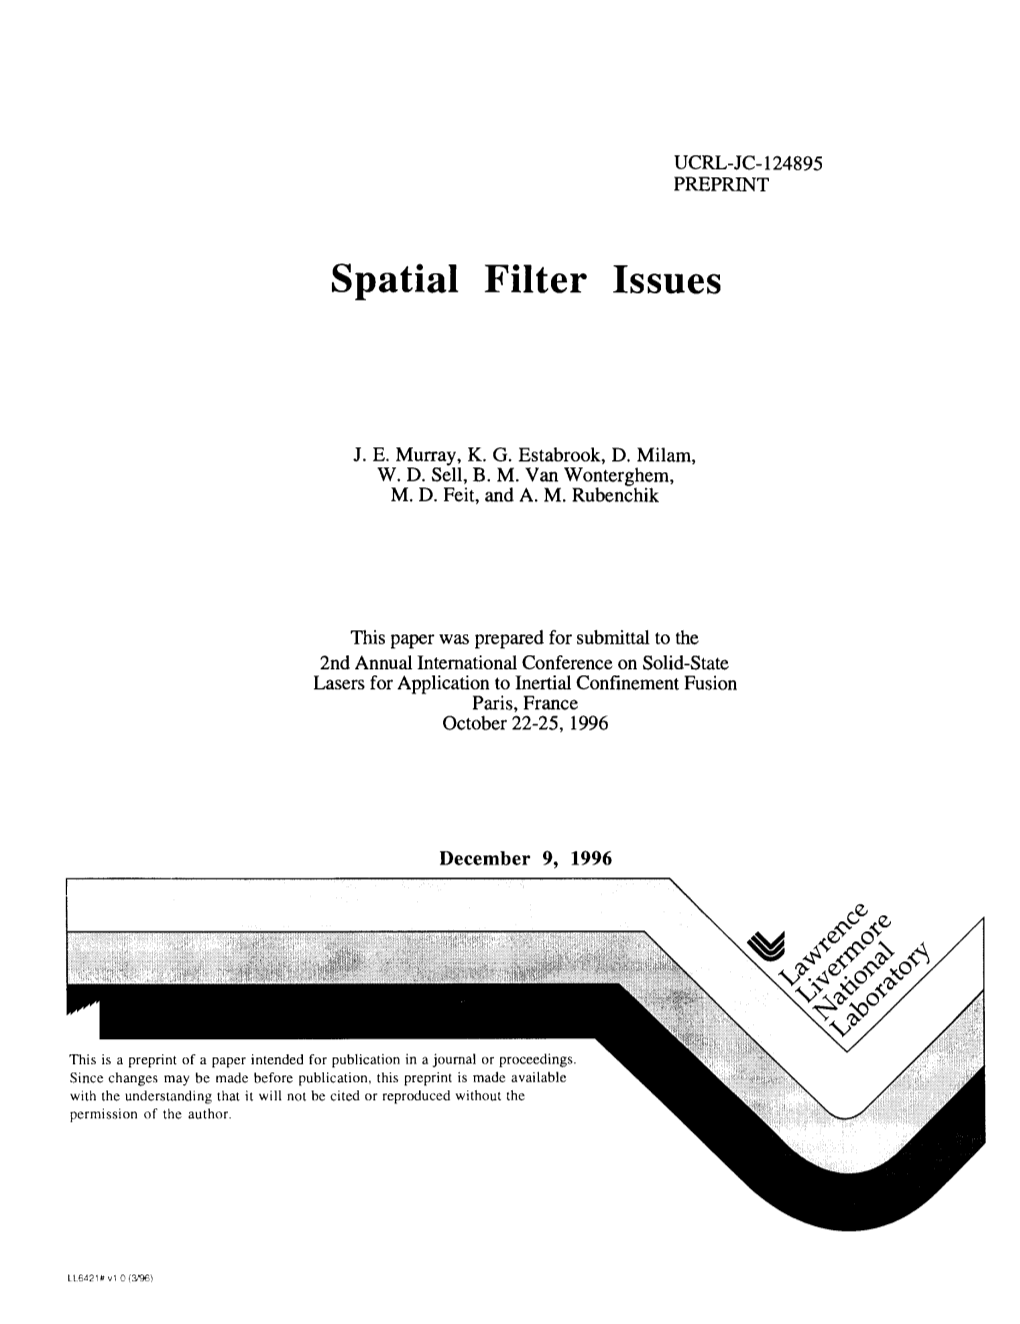 Spatial Filter Issues